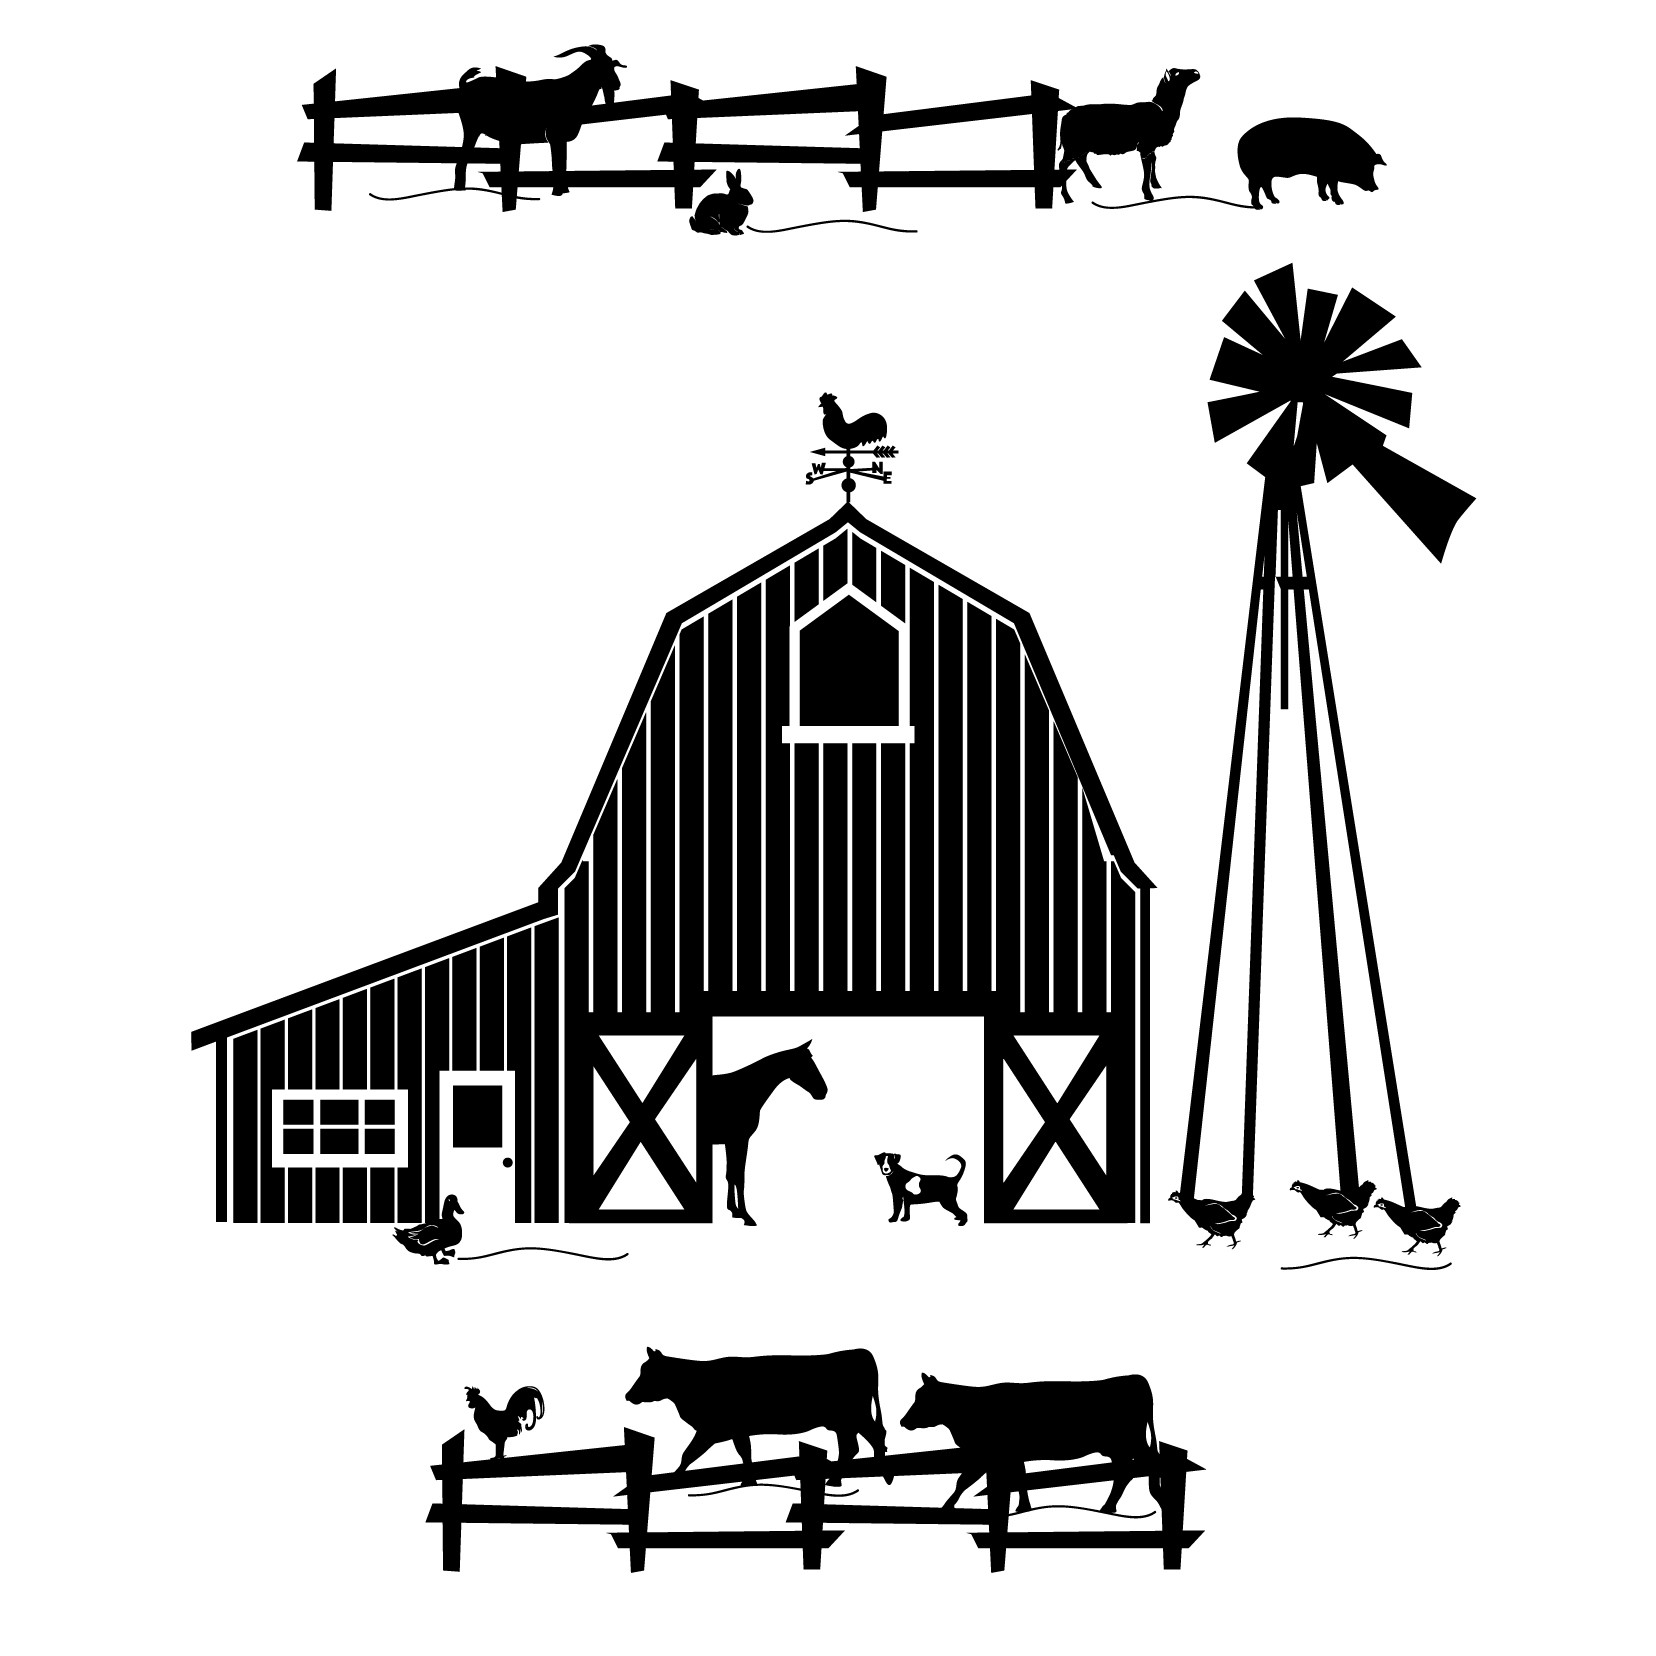 Simple Sketch Drawing Old Houses Barns Field Animals with simple drawing